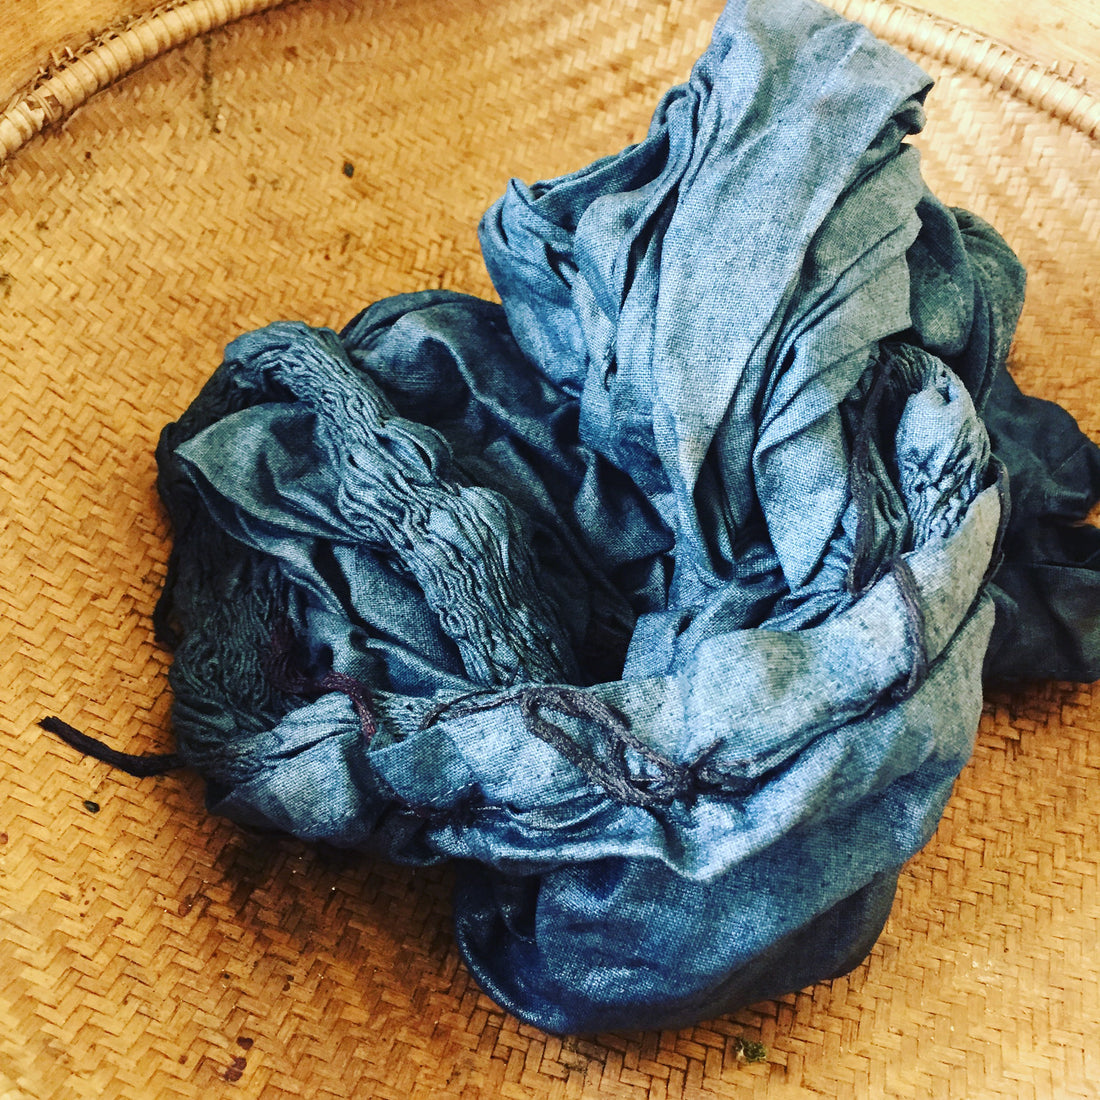 Philippine Natural Dyes: A Short Overview